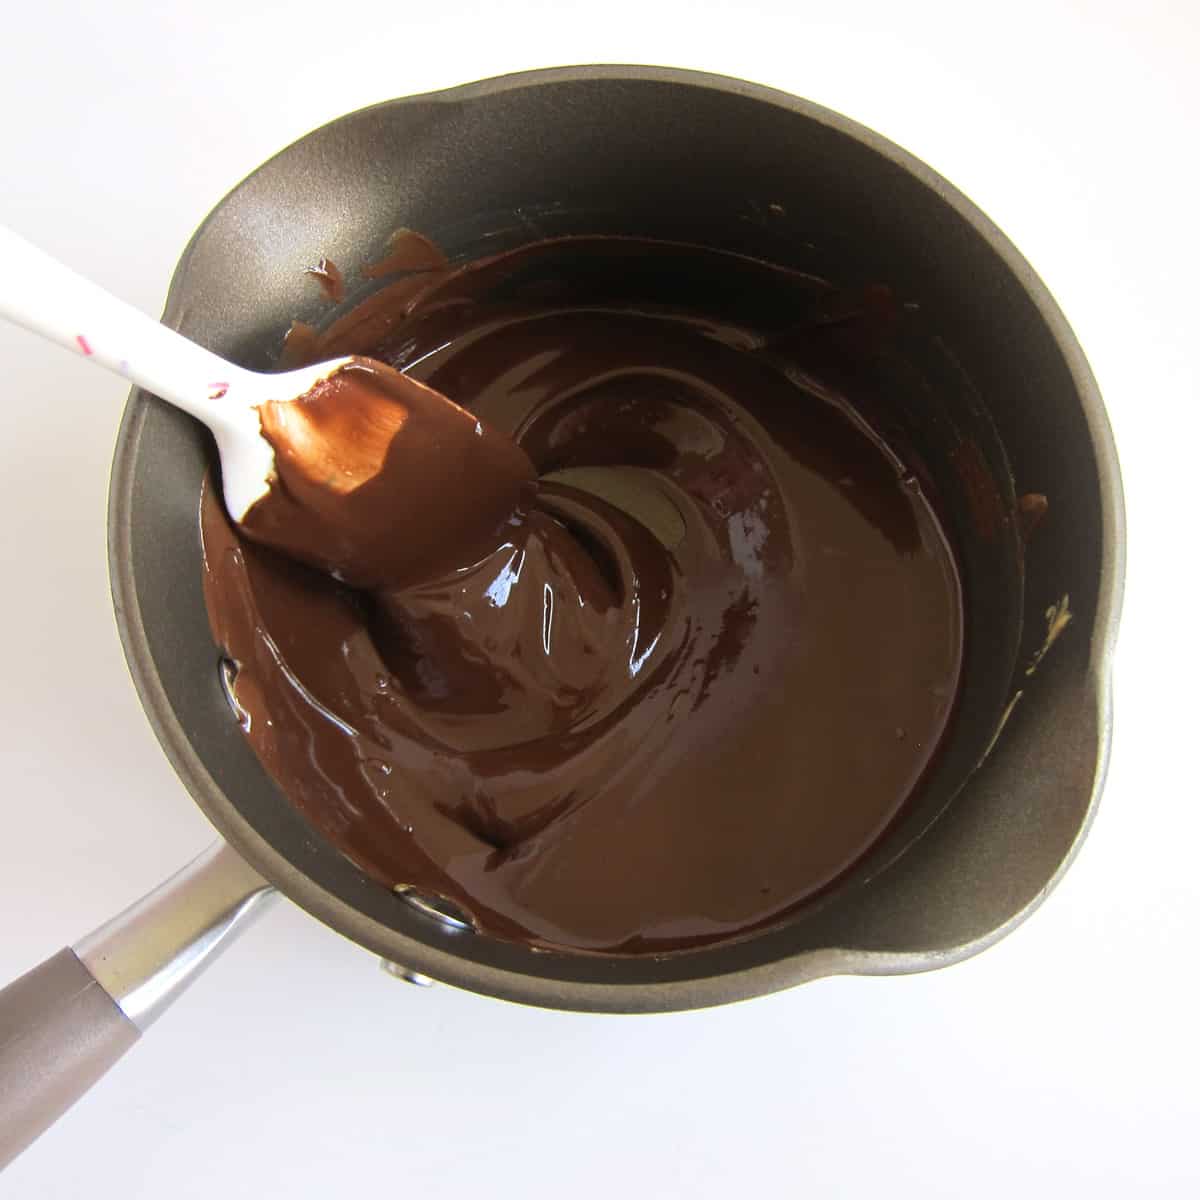 stirring melted chocolate and peanut butter